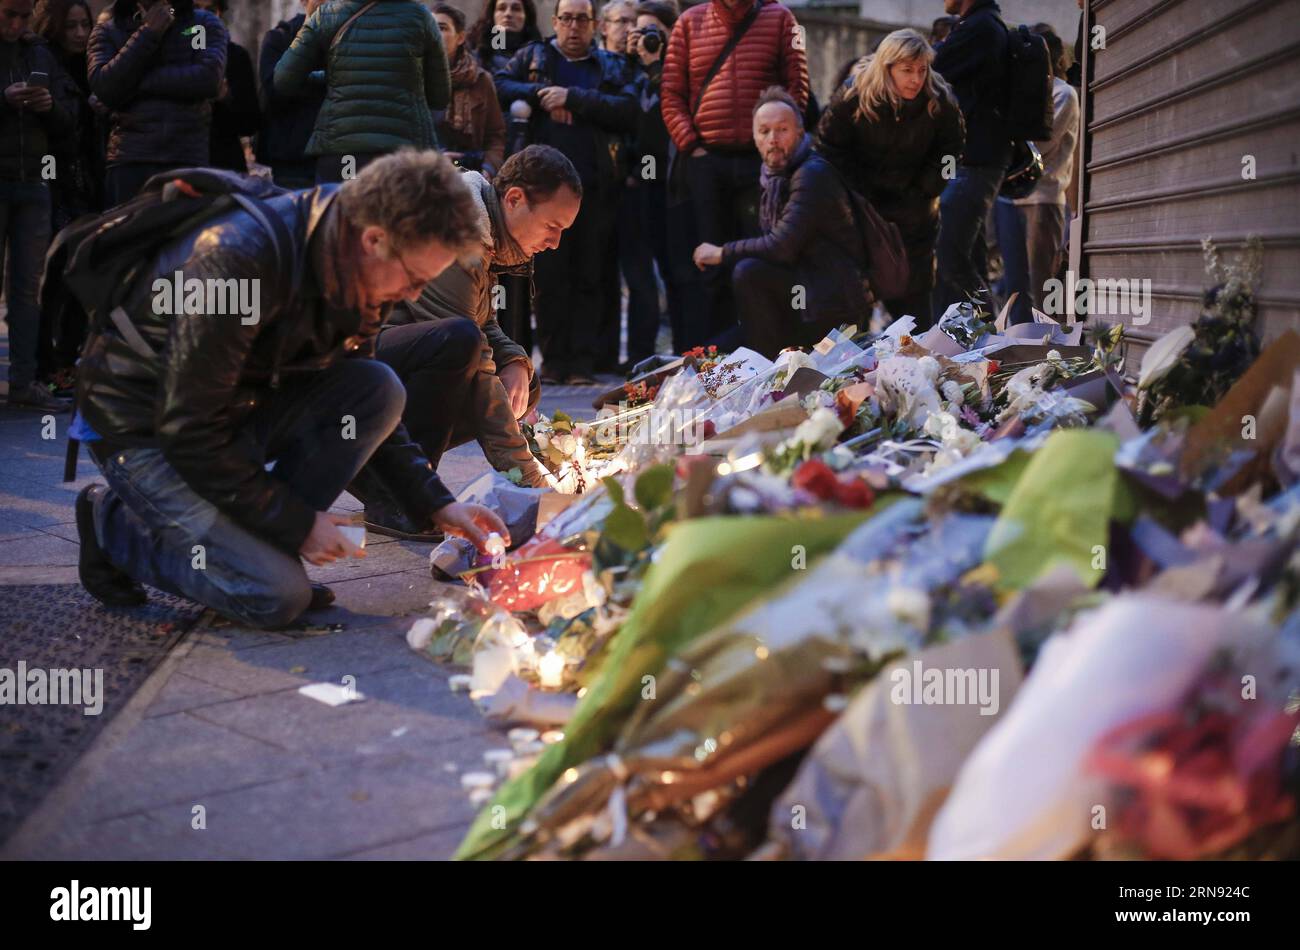 (151114) -- PARIS, Nov. 14, 2015 -- People place flowers and candles to pay homage to victims in front of the Le Petit Cambodge Restaurant where an attack happend on Friday in Paris, France, Nov. 14, 2015. French President Francois Hollande announced a three-days national mourning on Saturday. ) FRANCE-PARIS-ATTACKS-MOURNING ZhouxLei PUBLICATIONxNOTxINxCHN Terroranschläge in Paris - Tatort Le Petit Cambodge - Gedenken an die Opfer   151114 Paris Nov 14 2015 Celebrities Place Flowers and Candles to Pay Homage to Victims in Front of The Le Petit Cambodge Restaurant Where to Attack Happend ON Fri Stock Photo